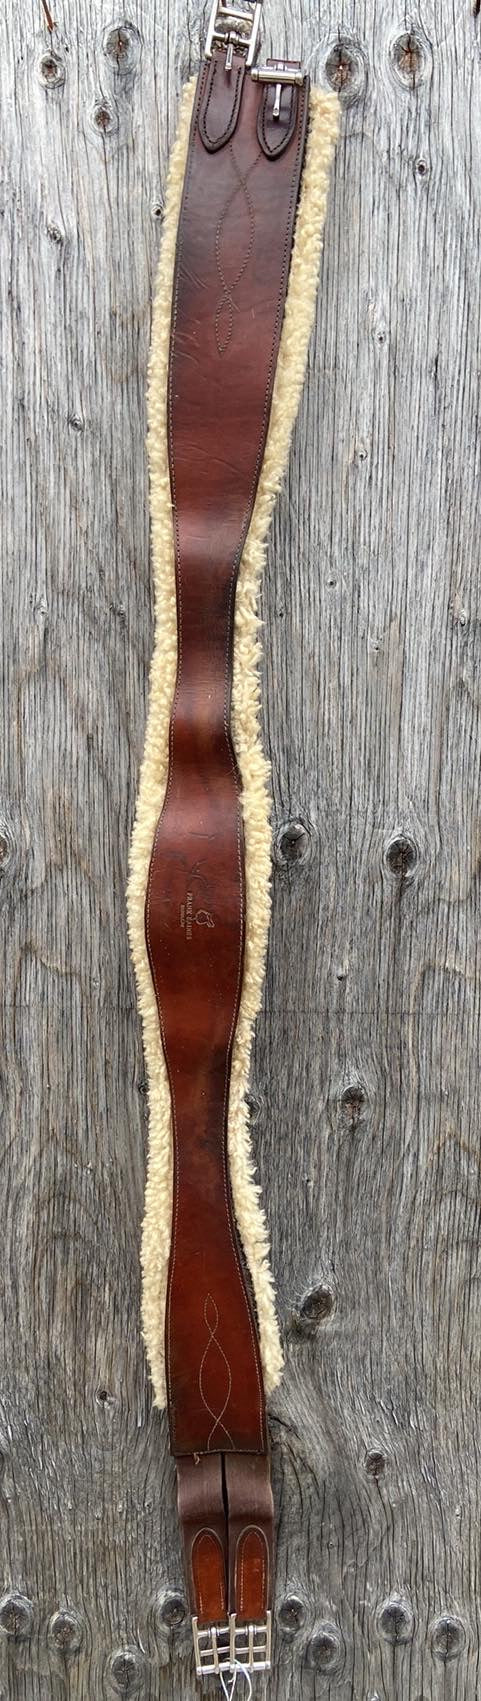 54” Frank baines leather girth with removable sheepskin